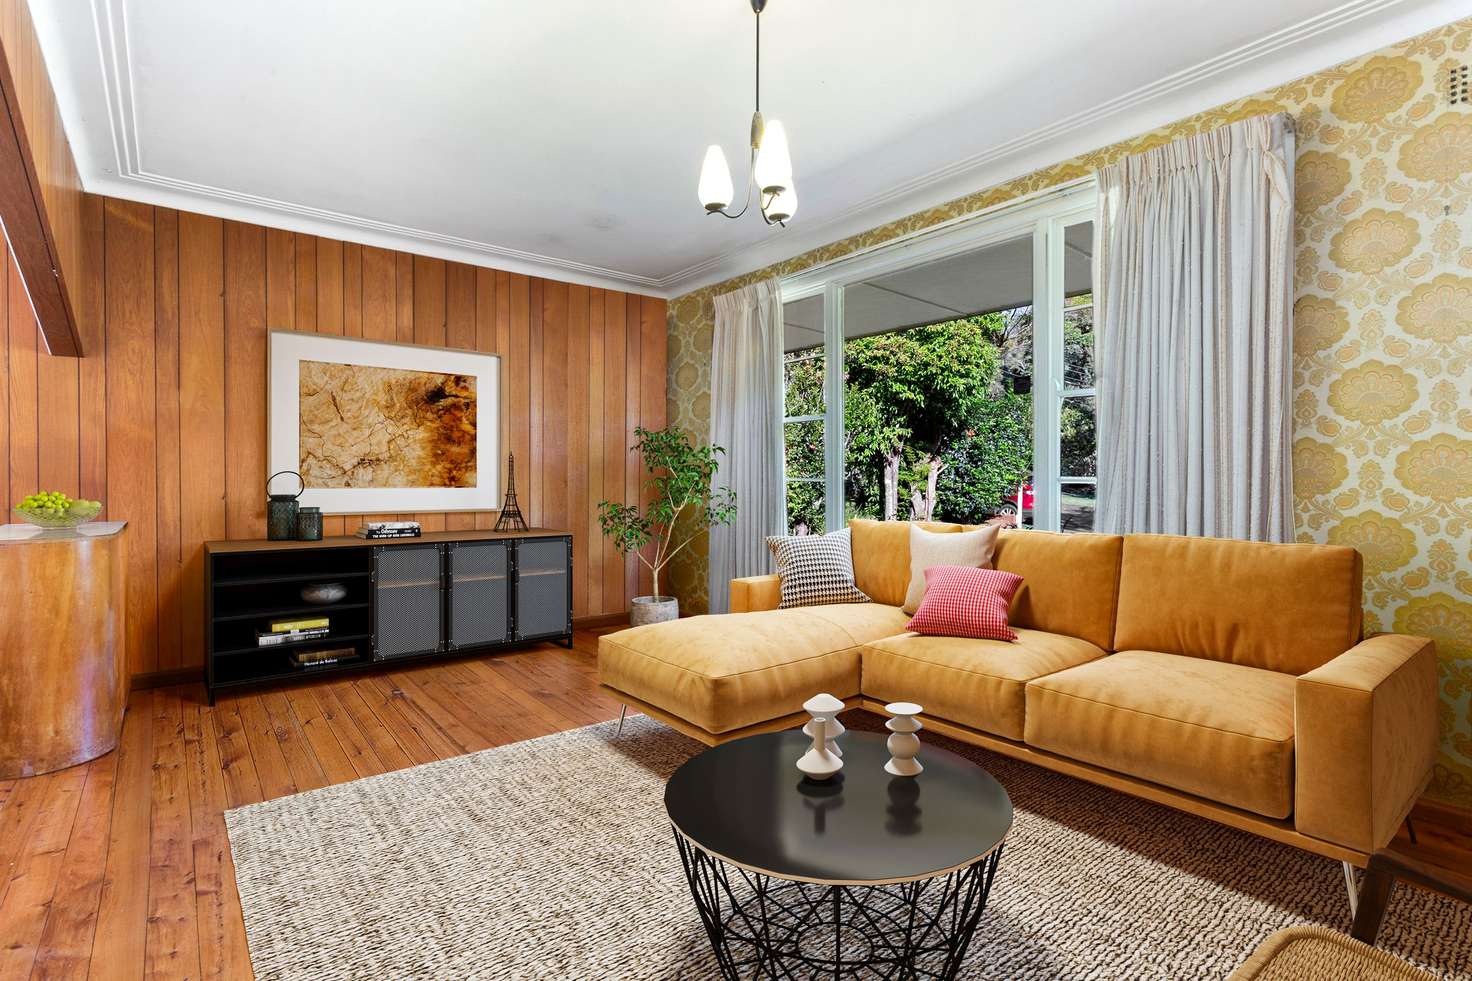 Main view of Homely house listing, 10 Holland Cresent, Frenchs Forest NSW 2086